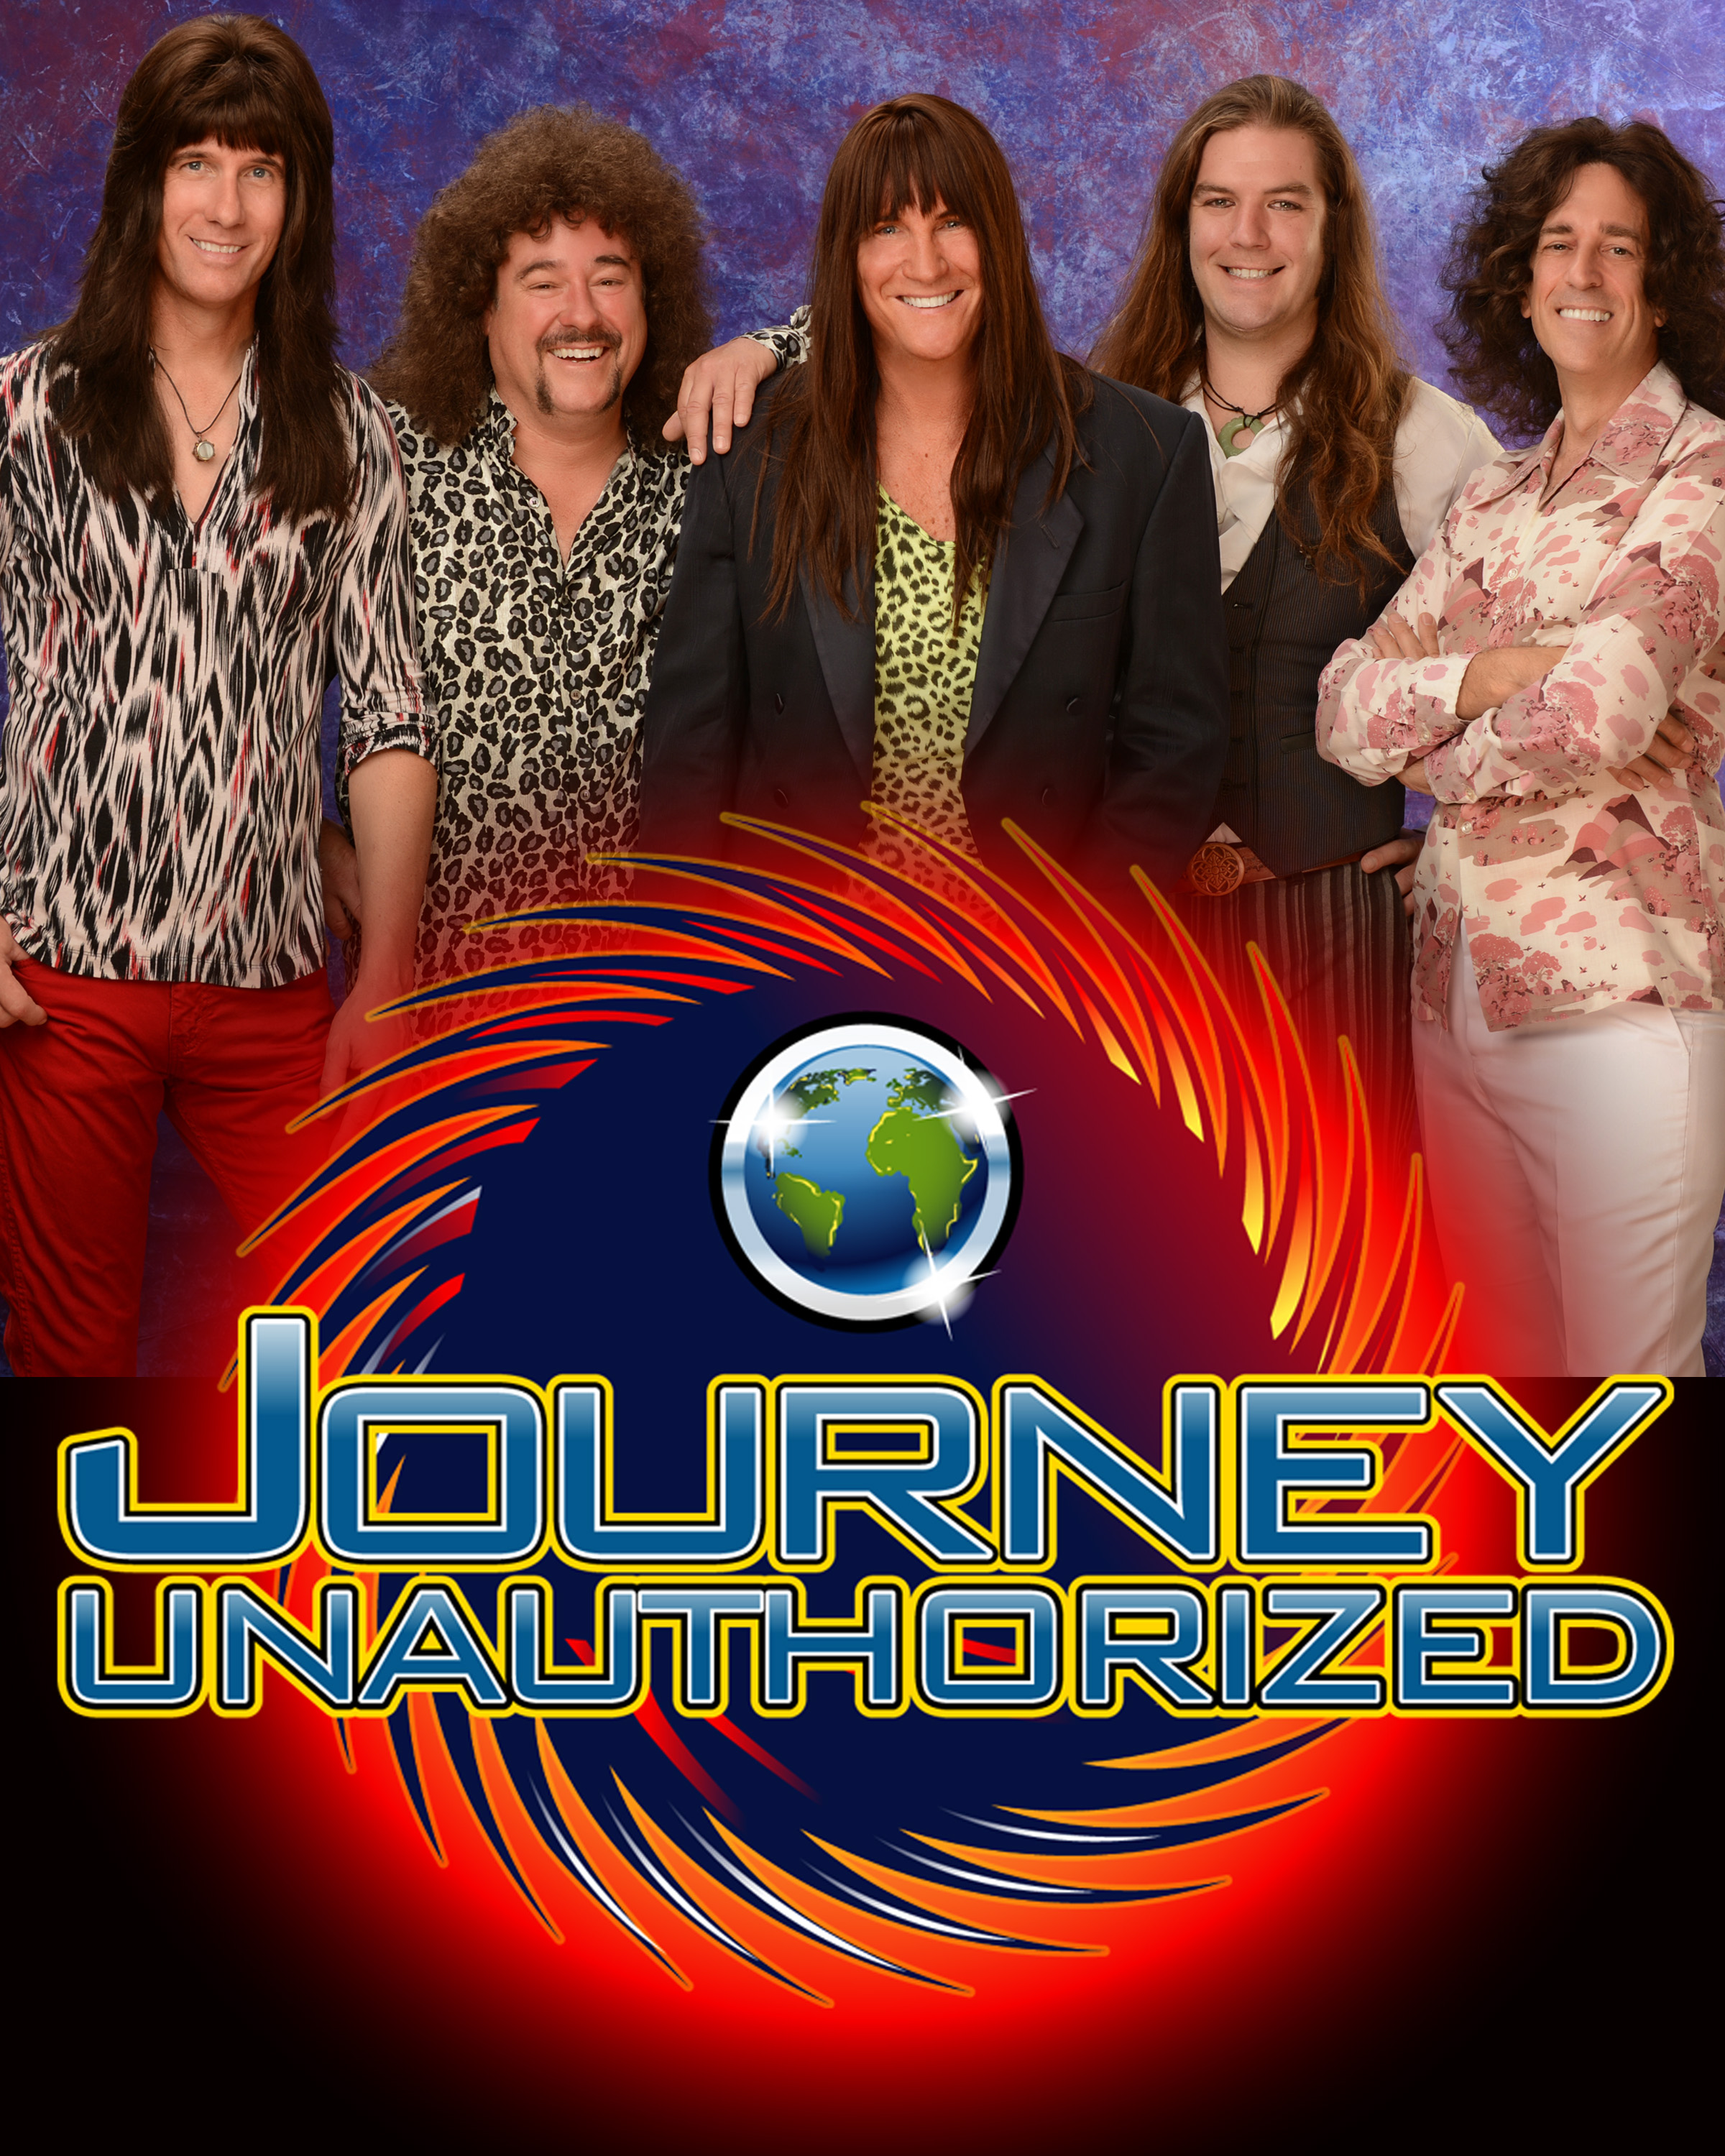 journey tribute band in reno